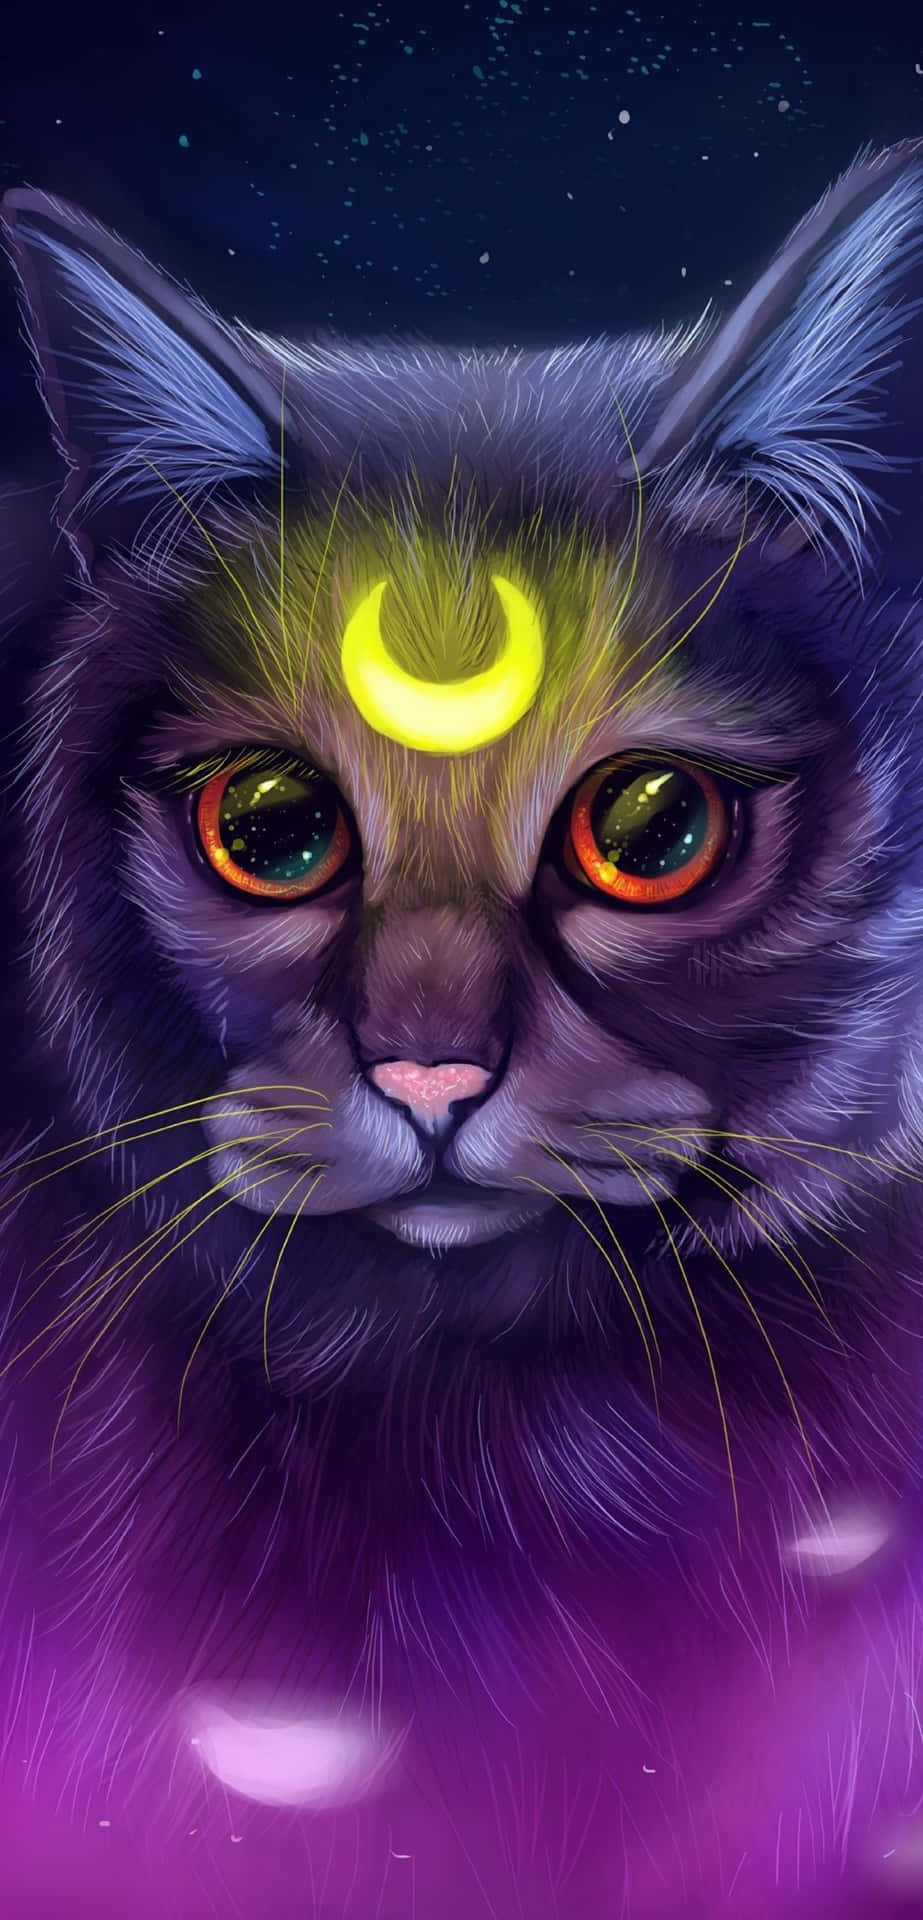 Explore the night sky with this adventurous Galaxy Cat Wallpaper